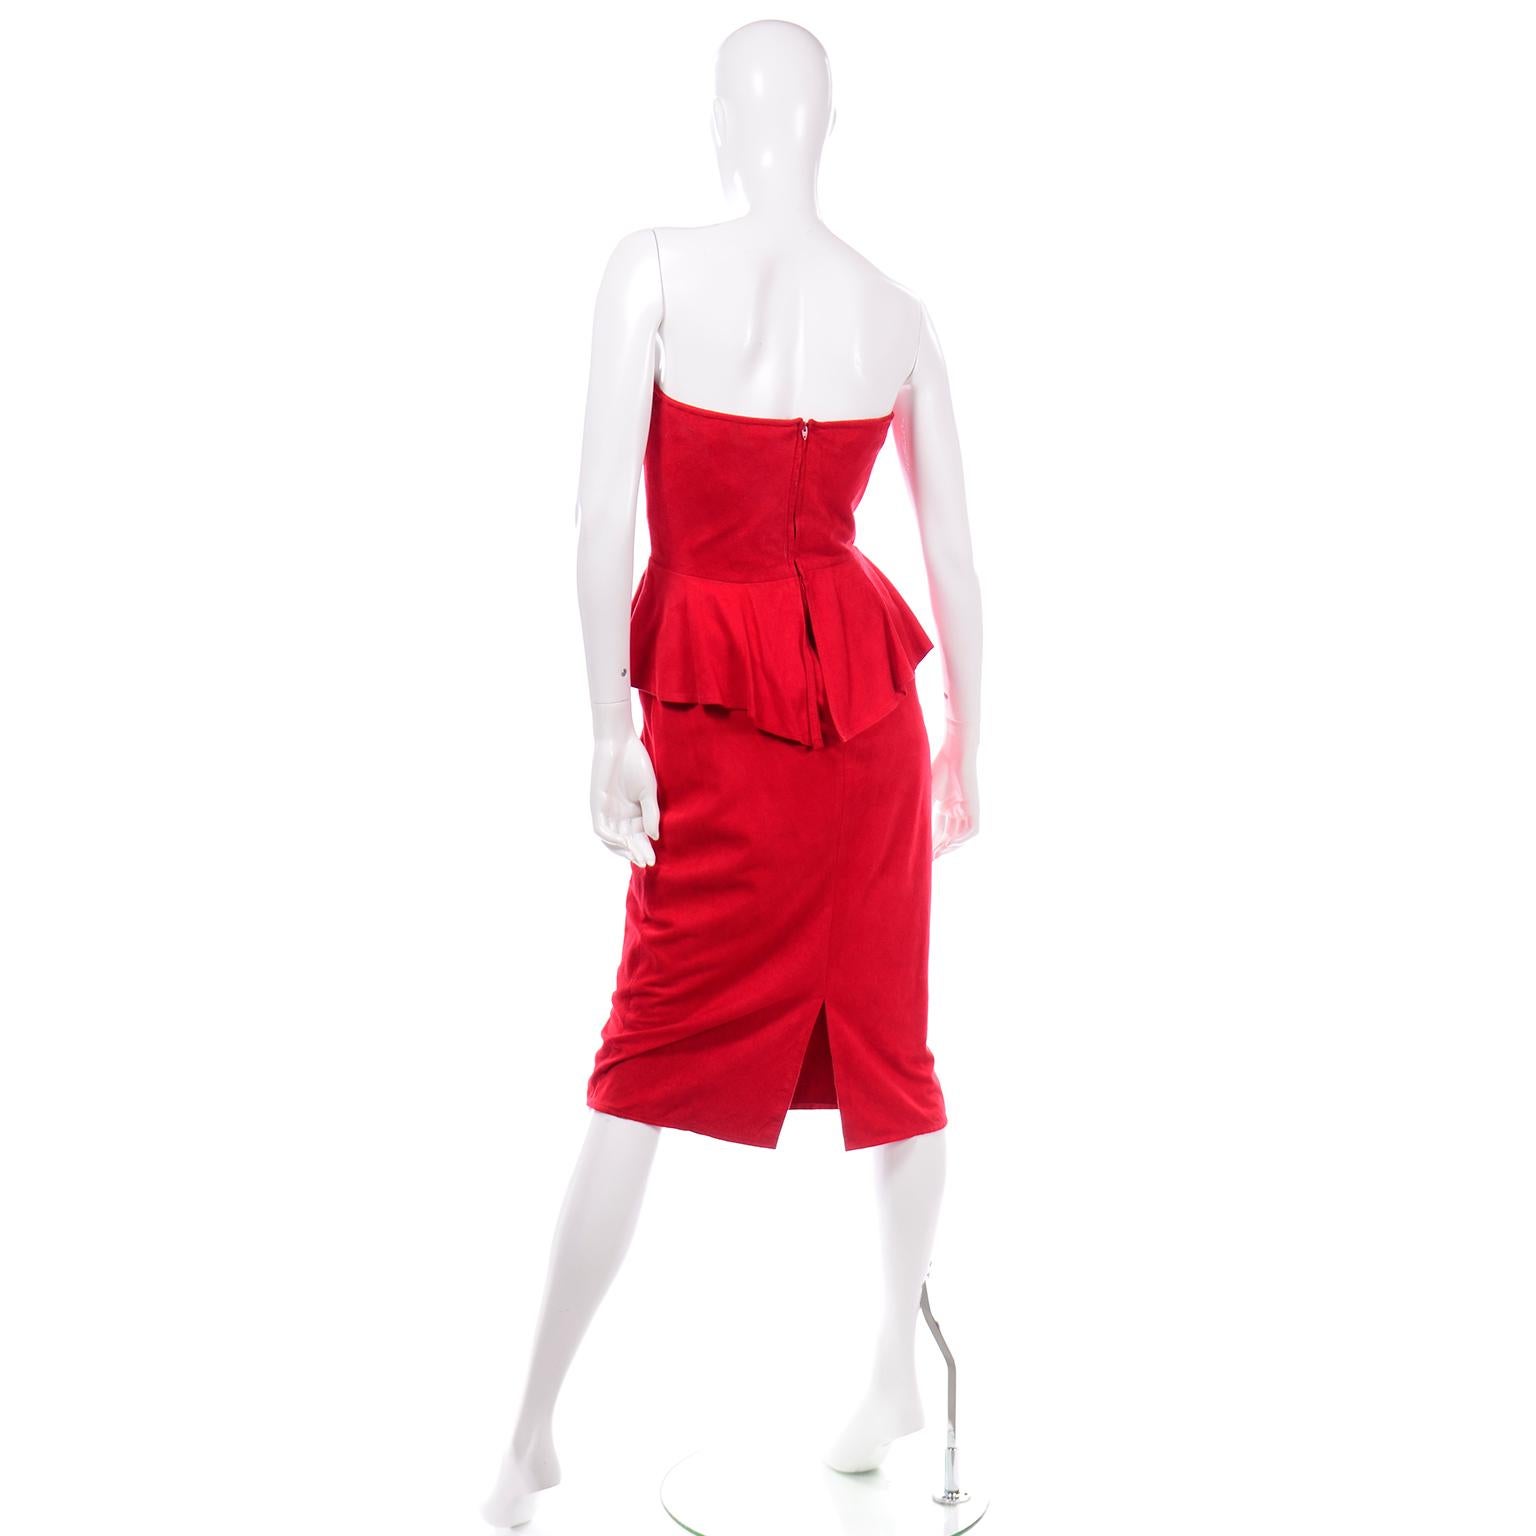 1980s Vintage Red Vakko Suede Peplum Strapless Dress In Excellent Condition For Sale In Portland, OR